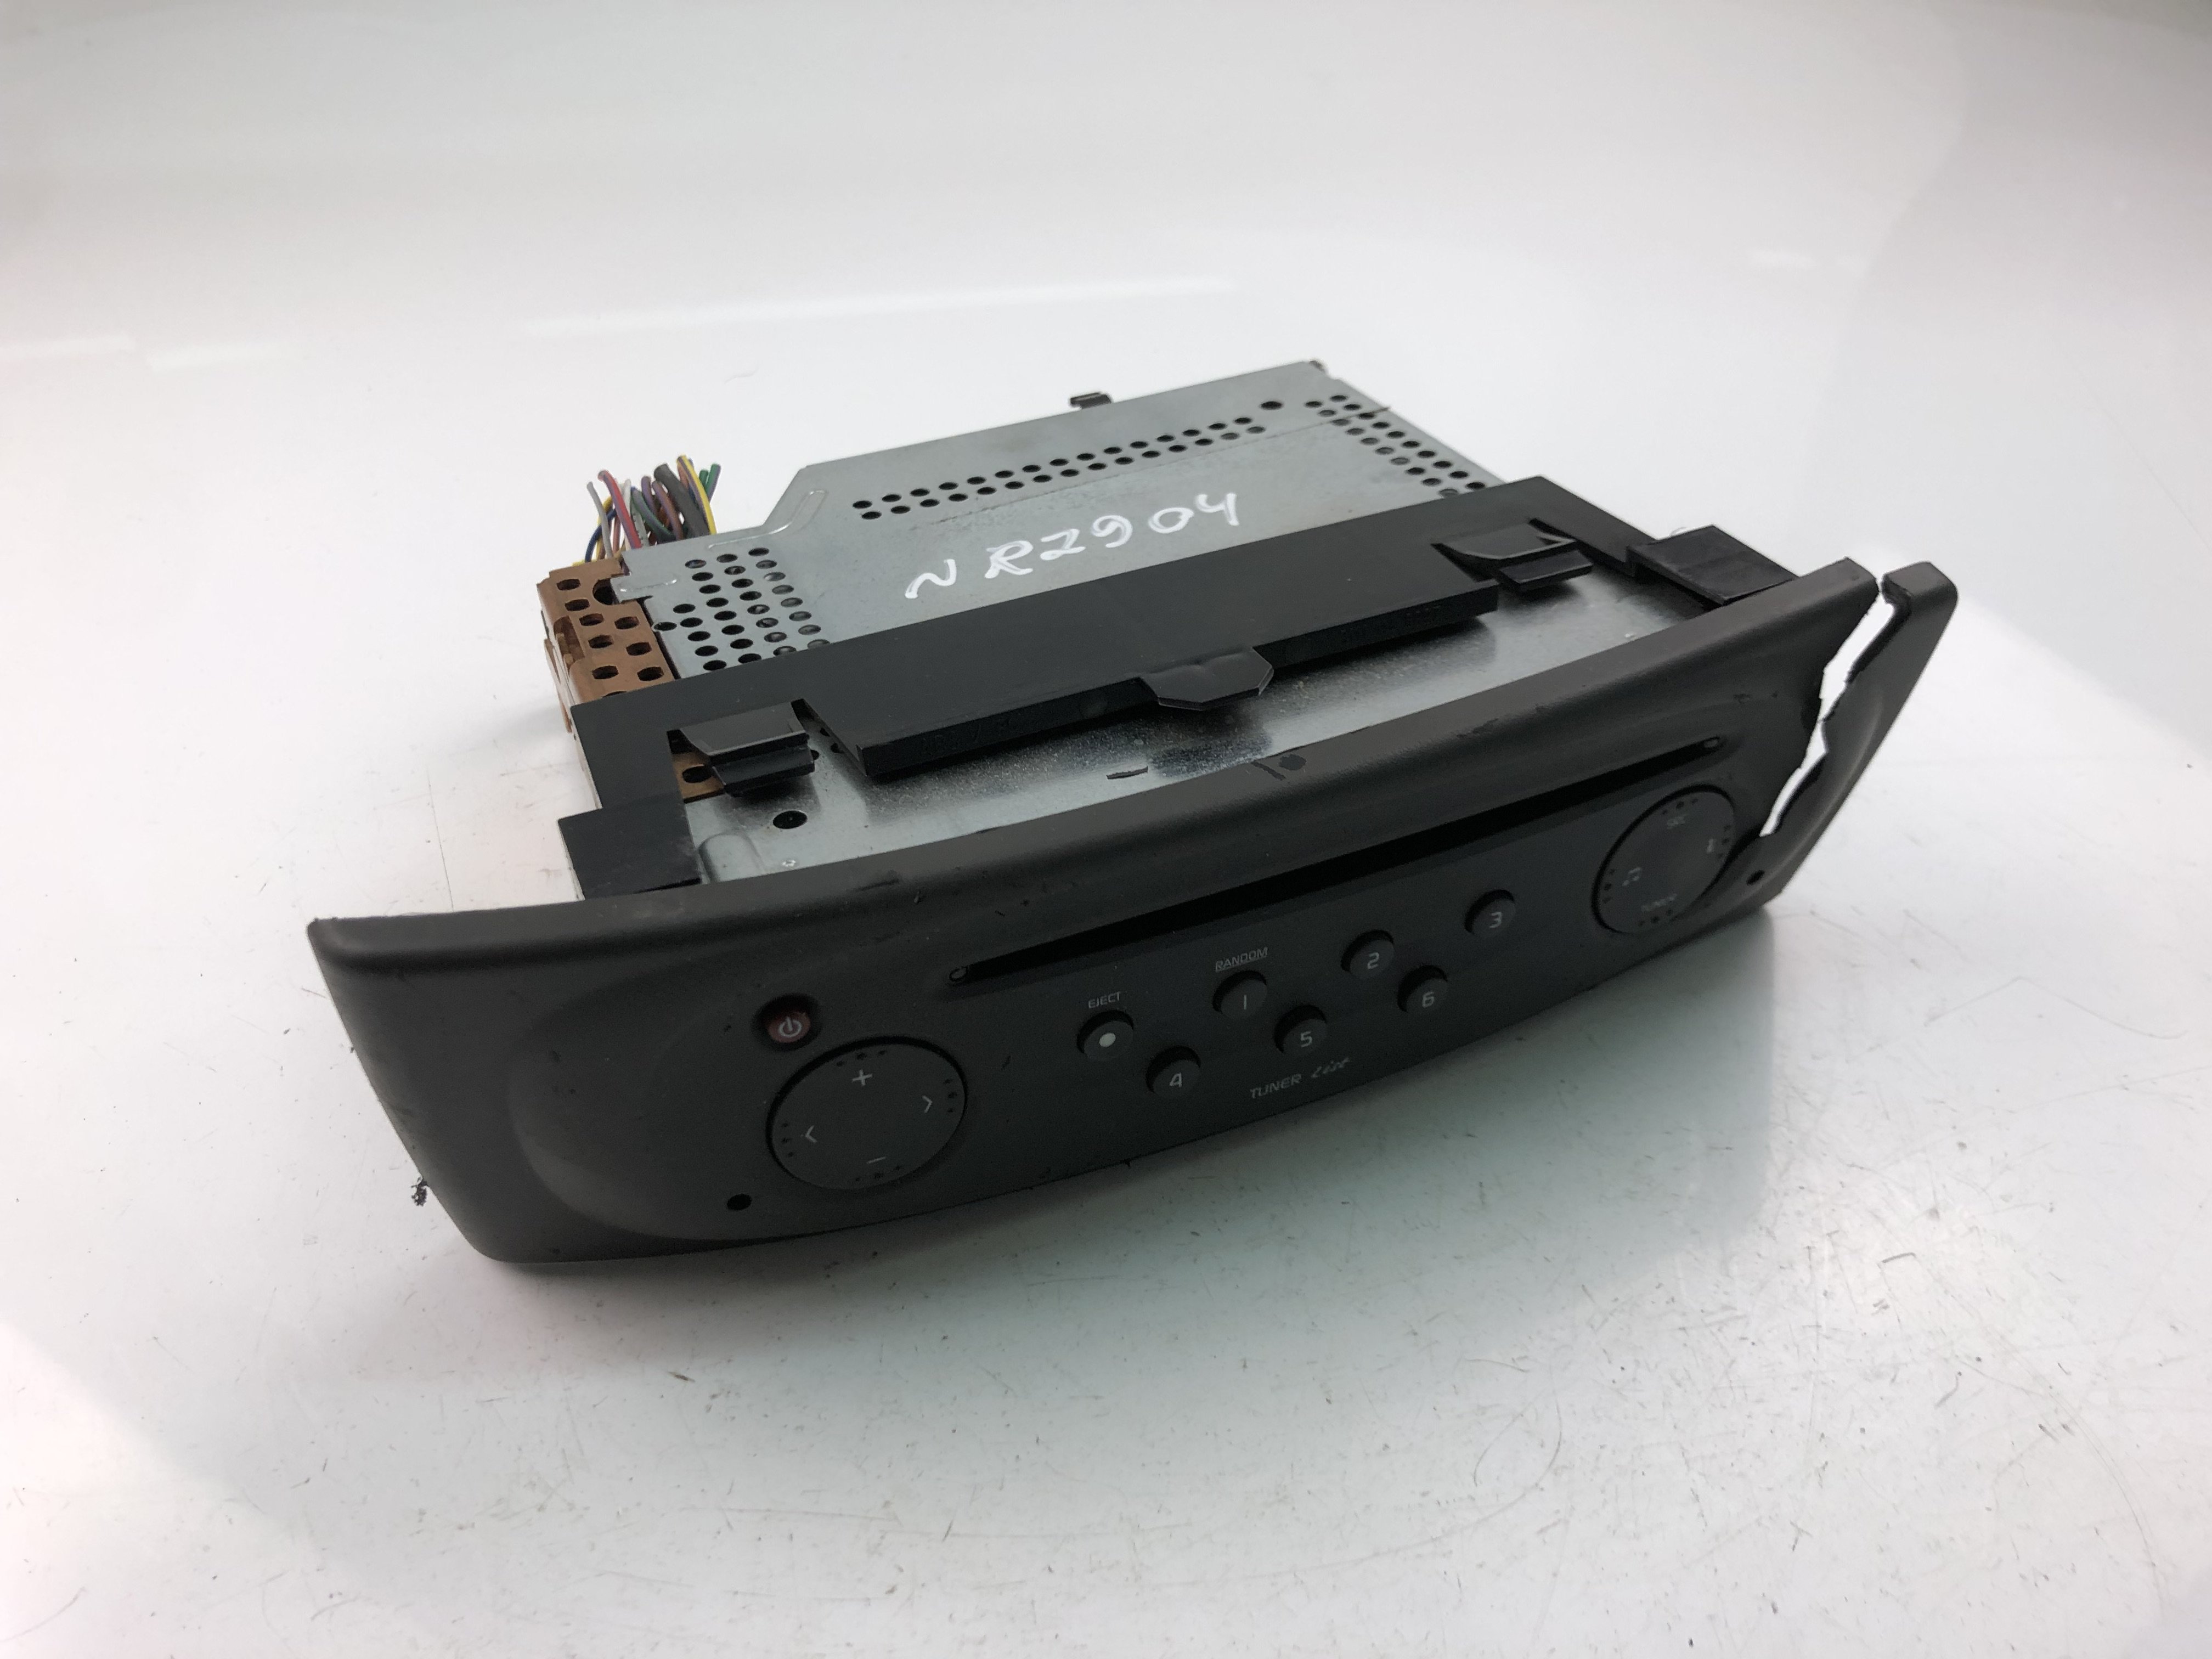 RENAULT Scenic 2 generation (2003-2010) Music Player Without GPS 8200152346 23460555